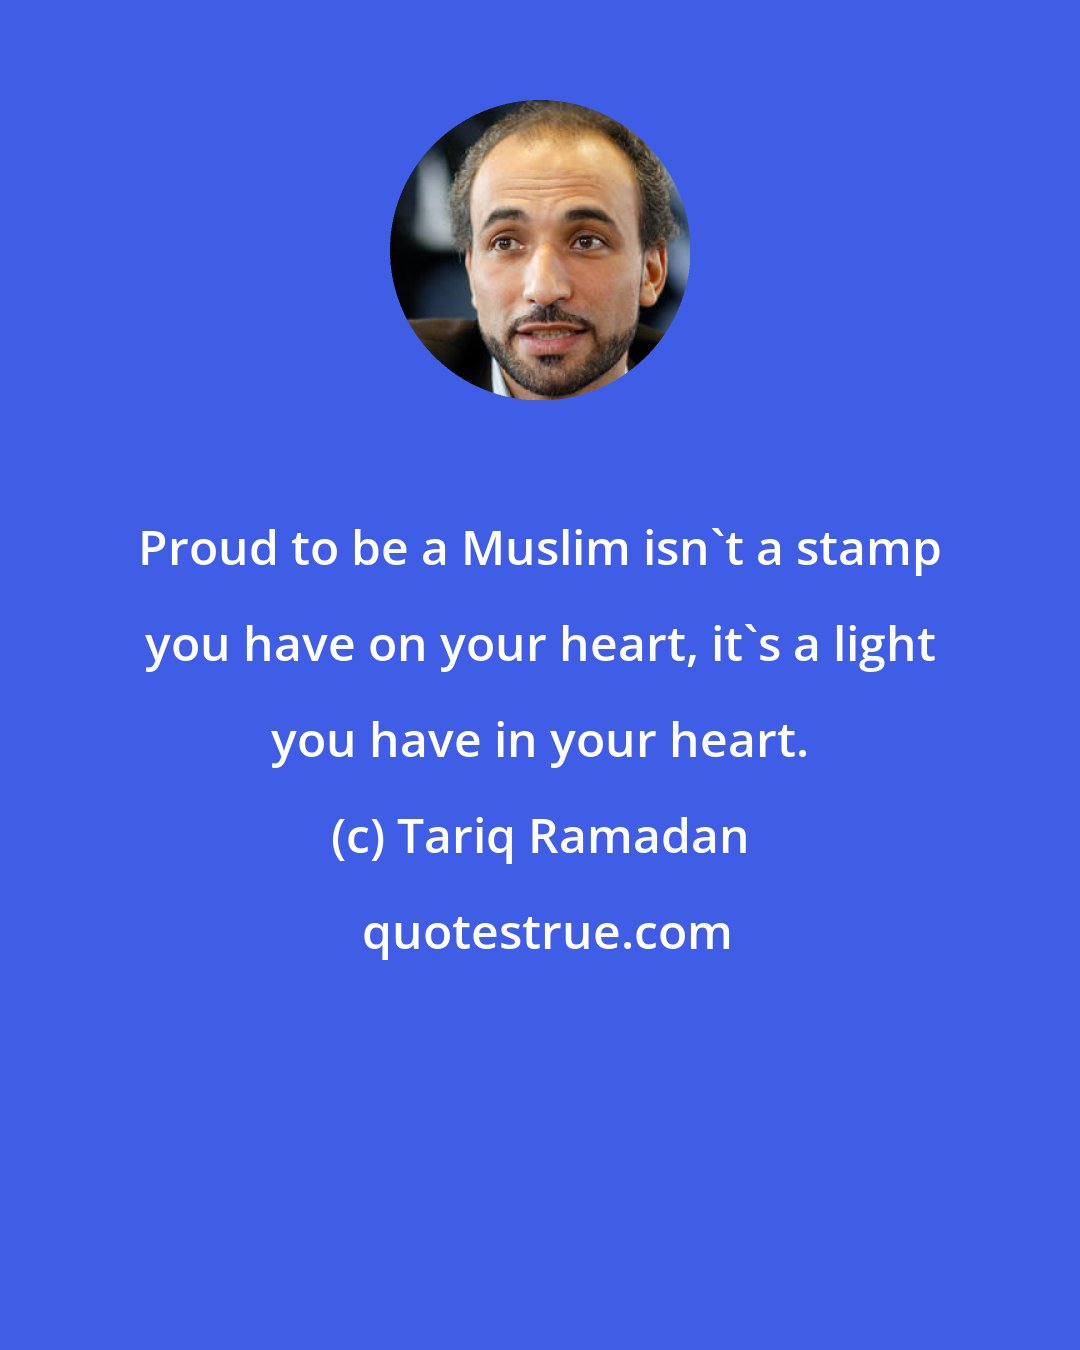 Tariq Ramadan: Proud to be a Muslim isn't a stamp you have on your heart, it's a light you have in your heart.